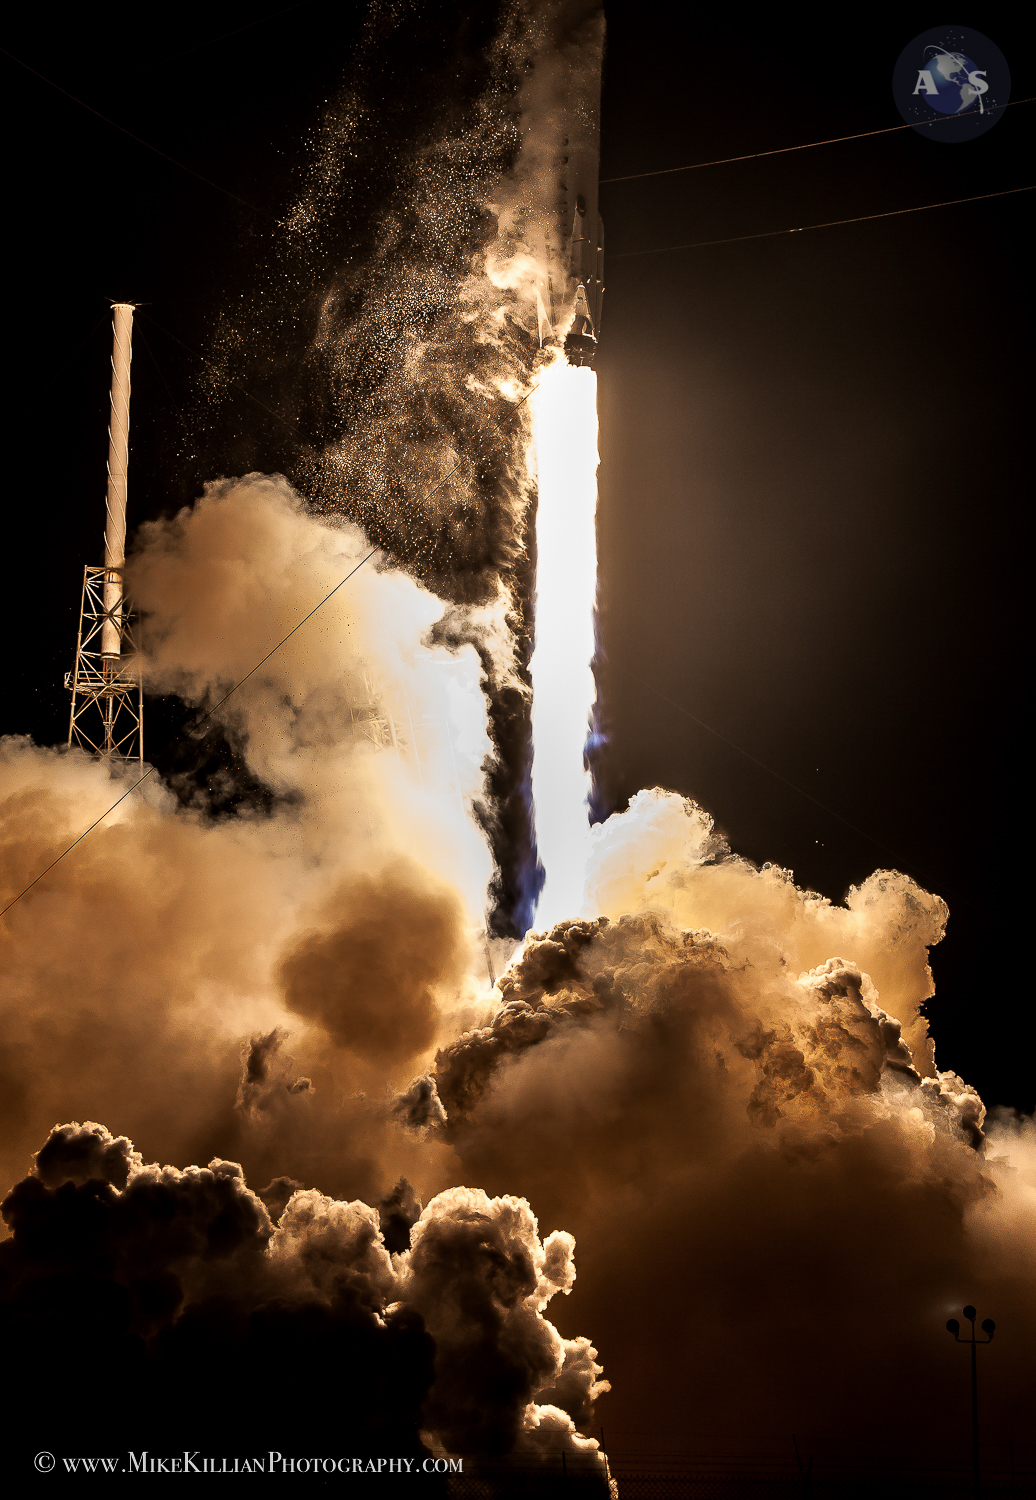 Through the Lens: SpaceX’s Fifth Dragon Resupply Launch to ISS in Stunning Imagery ...1036 x 1500